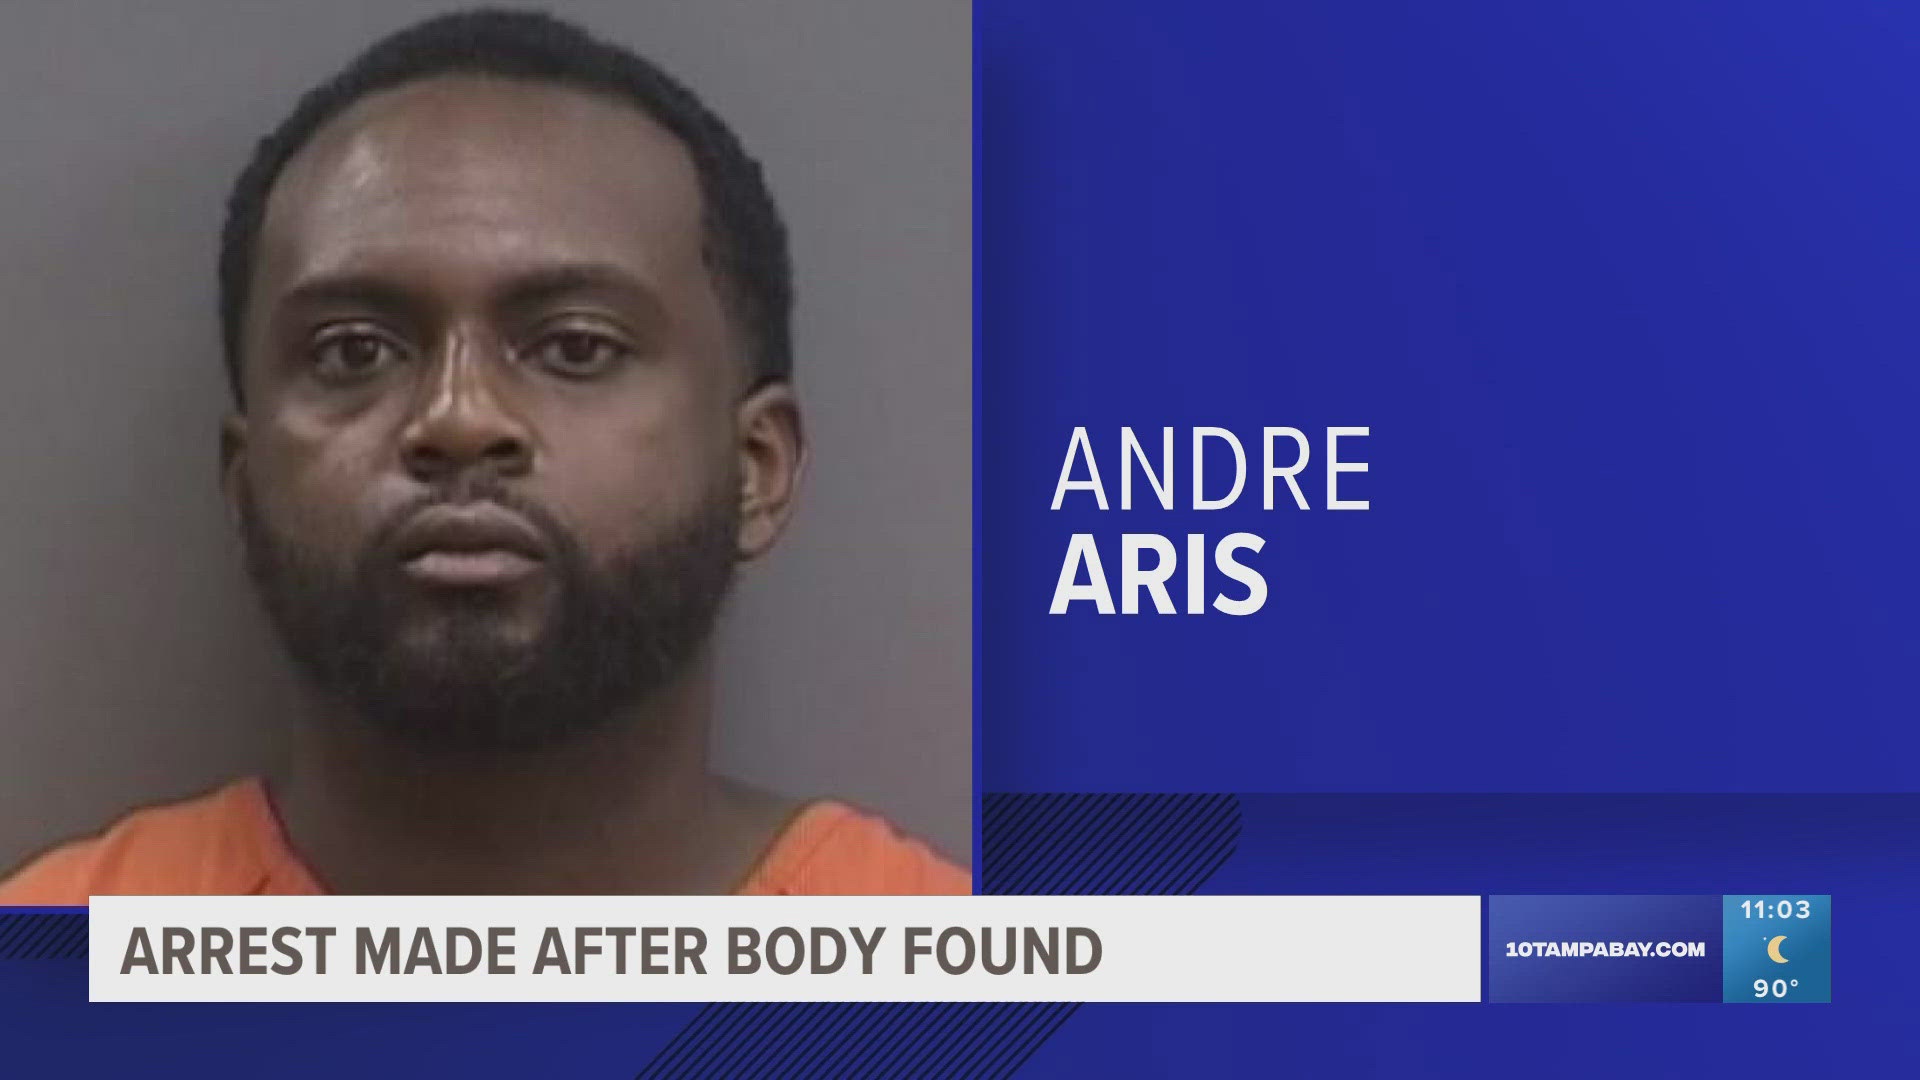 Police say they tracked the victim's vehicle to the house of Andre Aris.